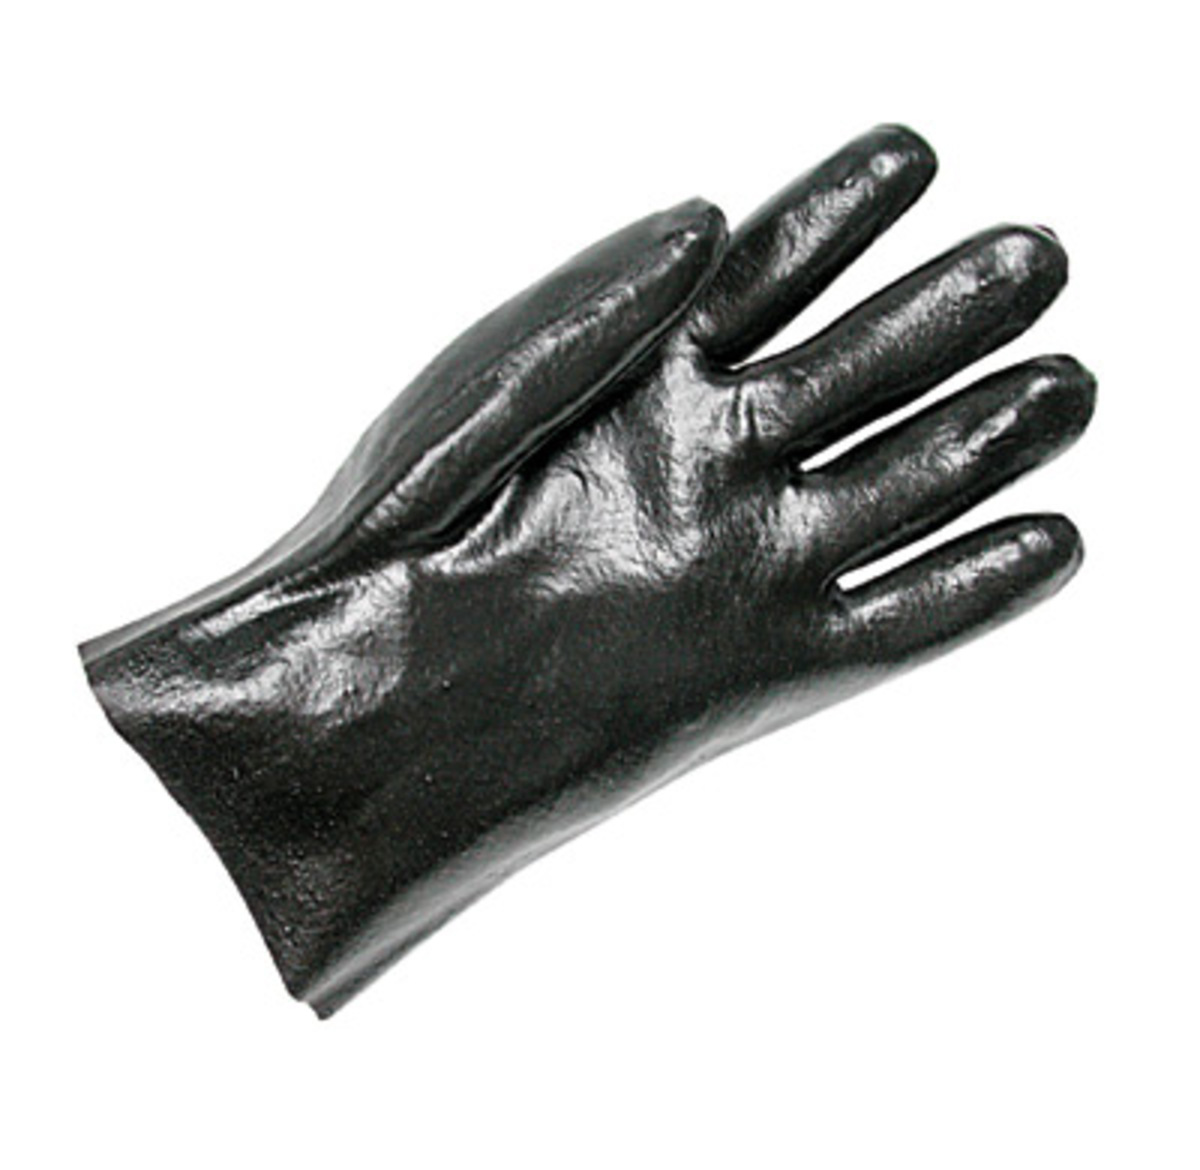 STANLEY 12” PVC Coated Cotton Lined Chemical Resistant Gloves Size Large Black 